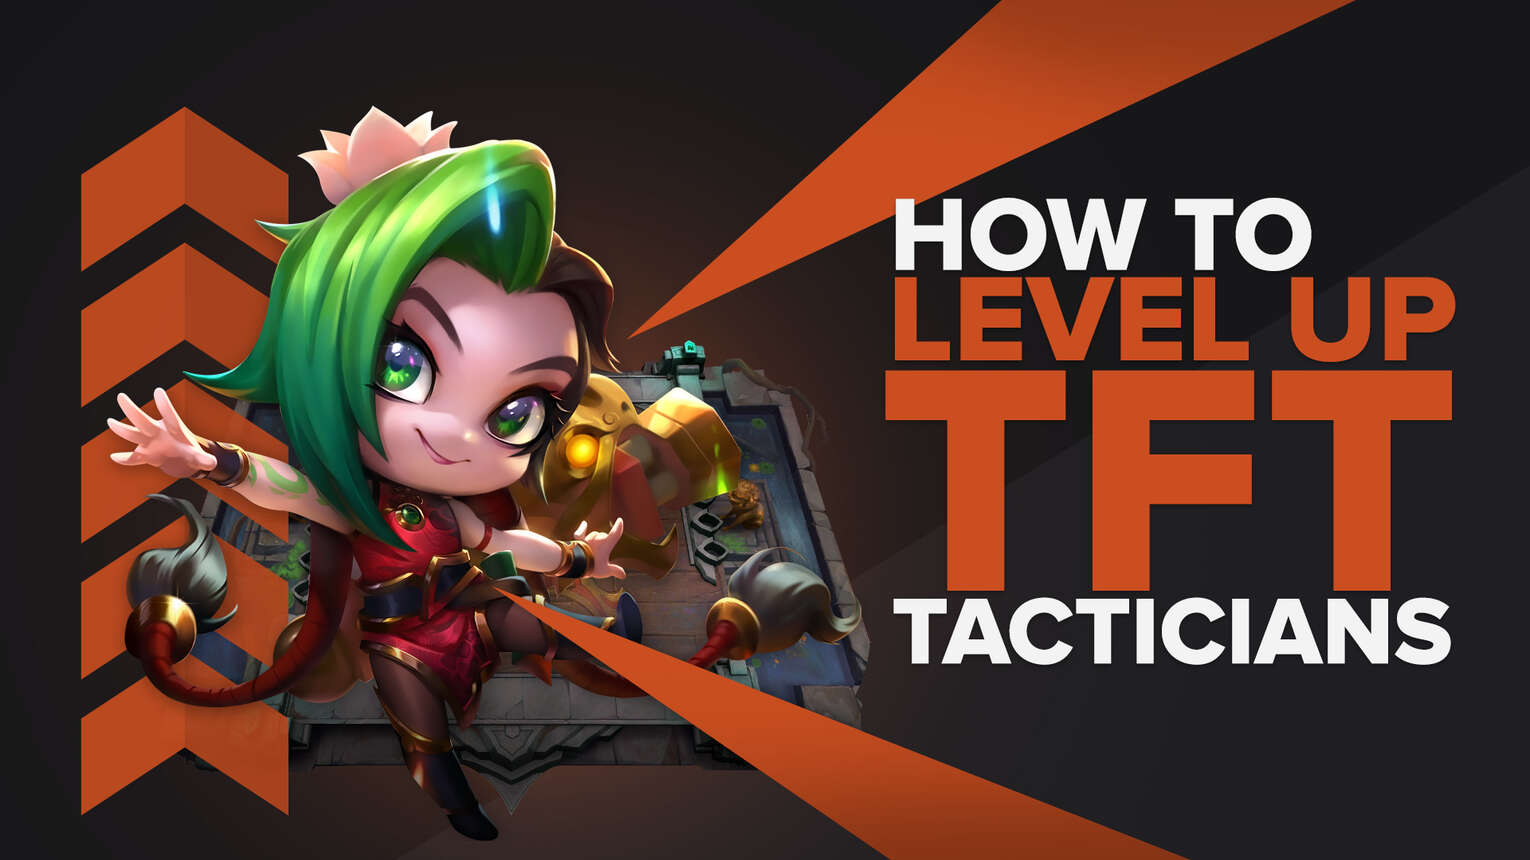 How To Level Up Tactician TFT